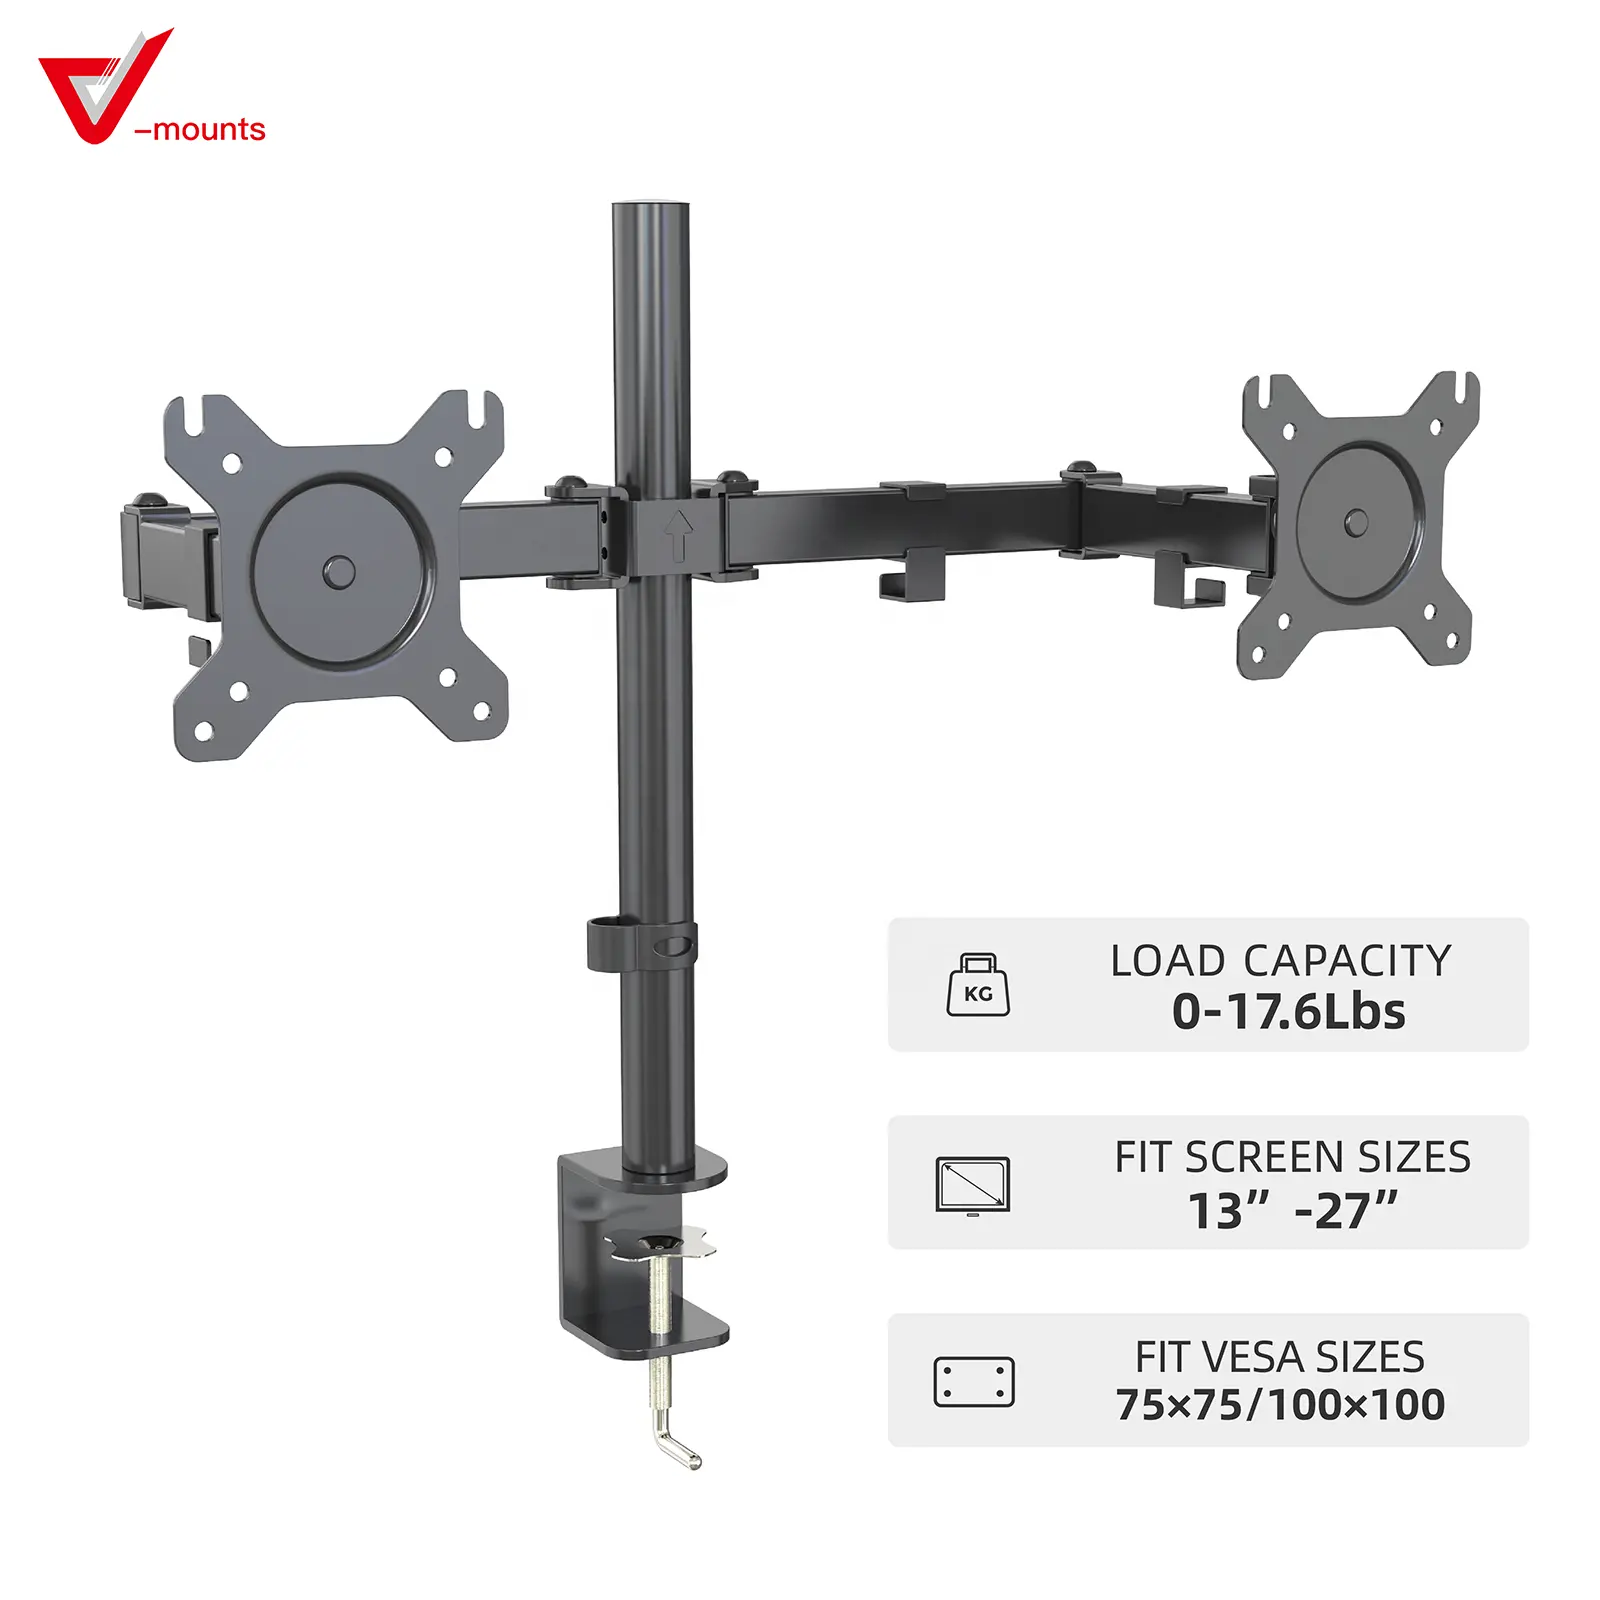 Stand Monitor Stand Clamp Grommet Mounting Double Articulating Arm Monitor Desk Mount Adjustable VESA Bracket Dual Monitor Stand VM-D34